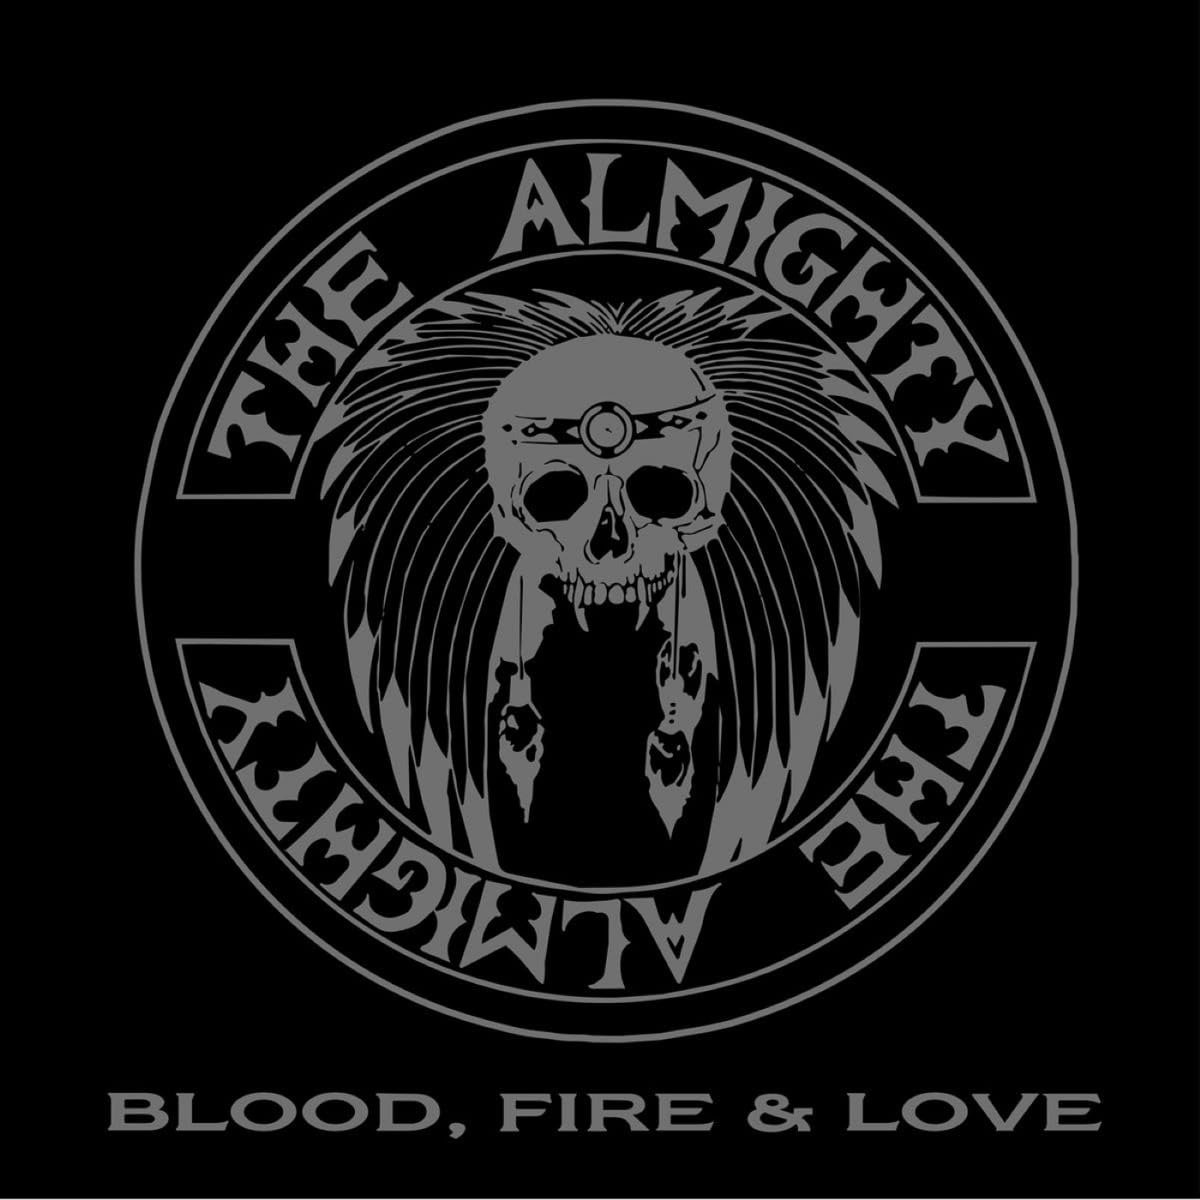 CD Shop - ALMIGHTY, THE BLOOD, FIRE & LOVE